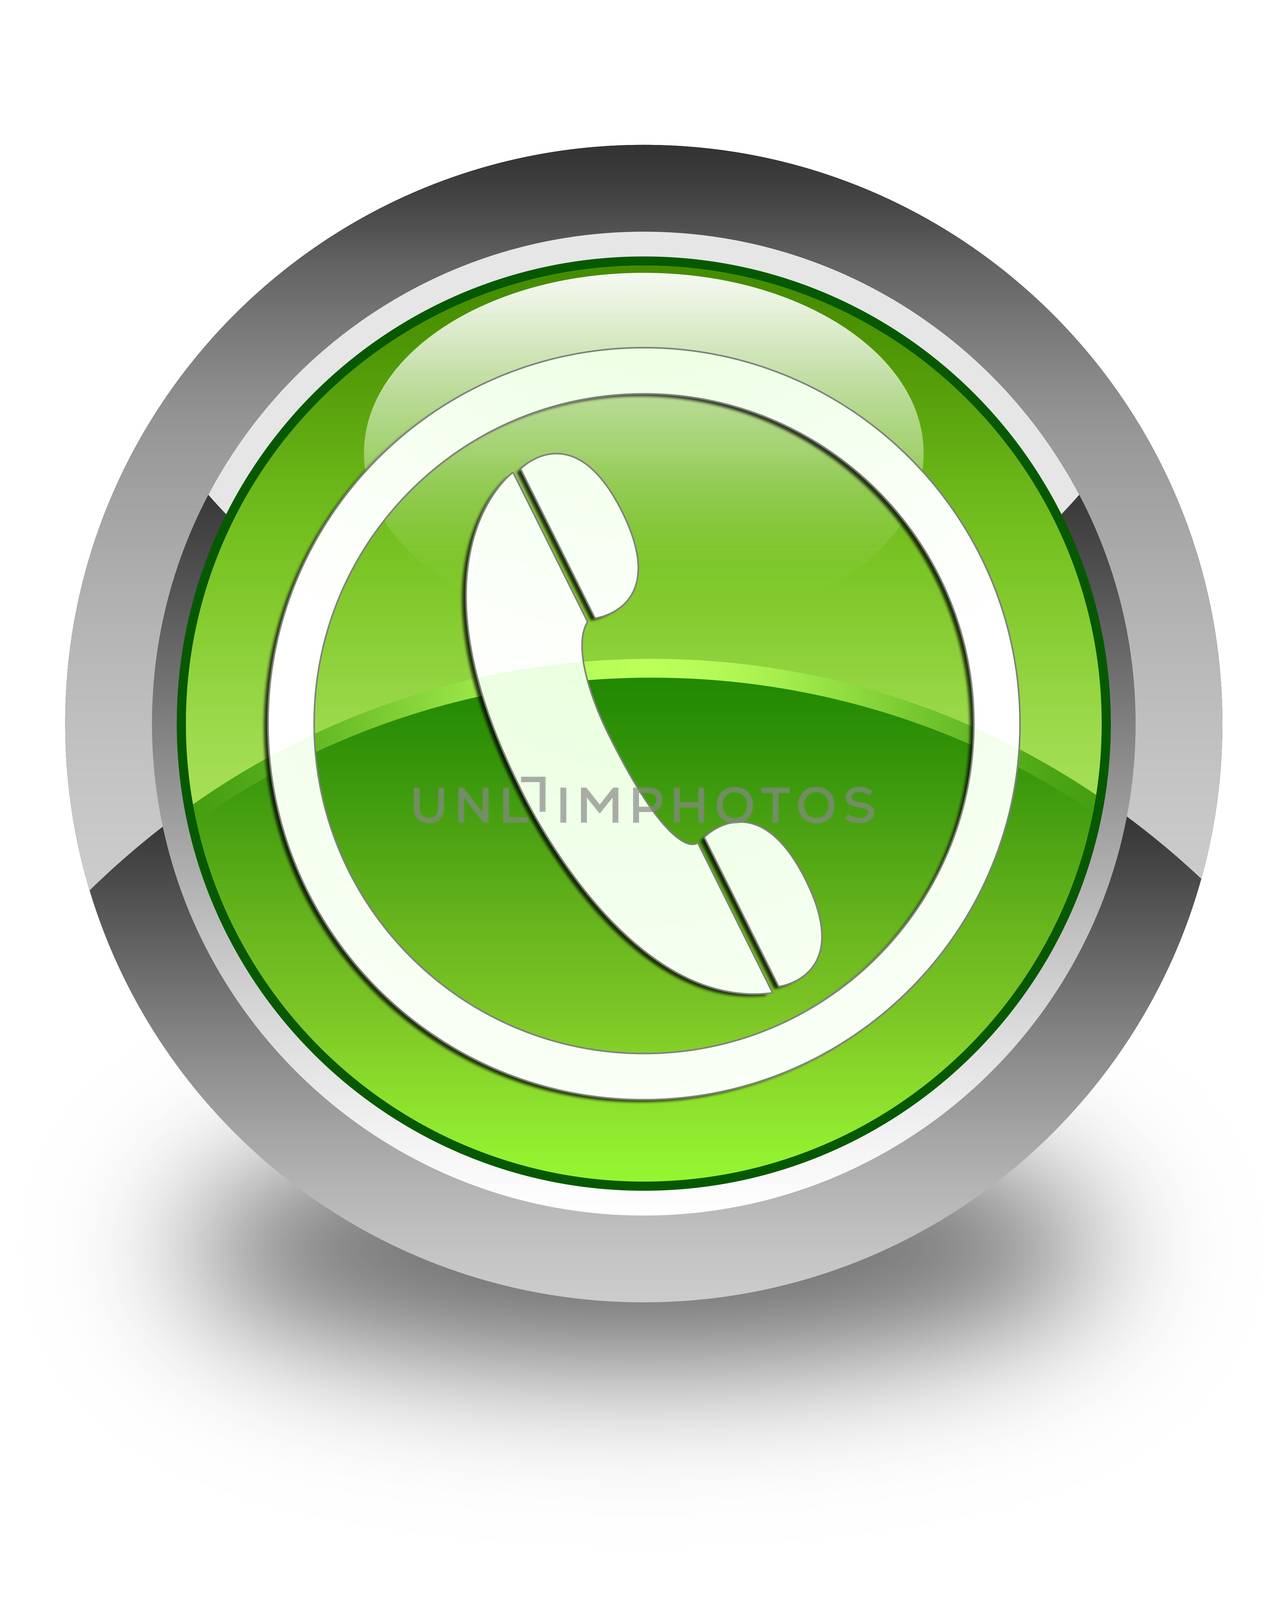 Phone icon on glossy green round button